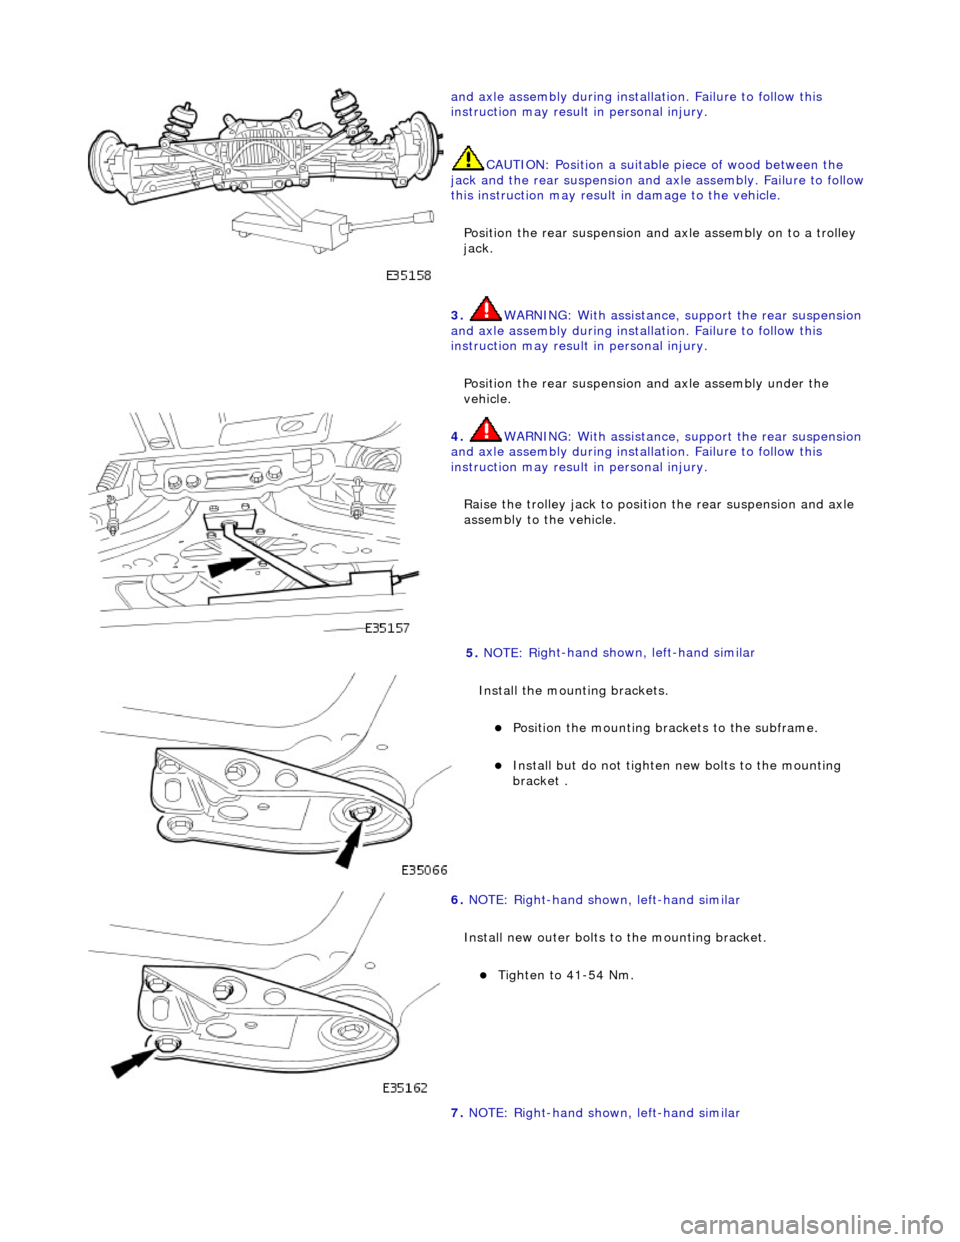 JAGUAR X308 1998 2.G Workshop Manual  
and axle assembly during installa
 tion. Failure to follow this 
instruction may result in personal injury.  
CAUTION: Position a suitable  piece of wood between the 
jack and the rear suspension an